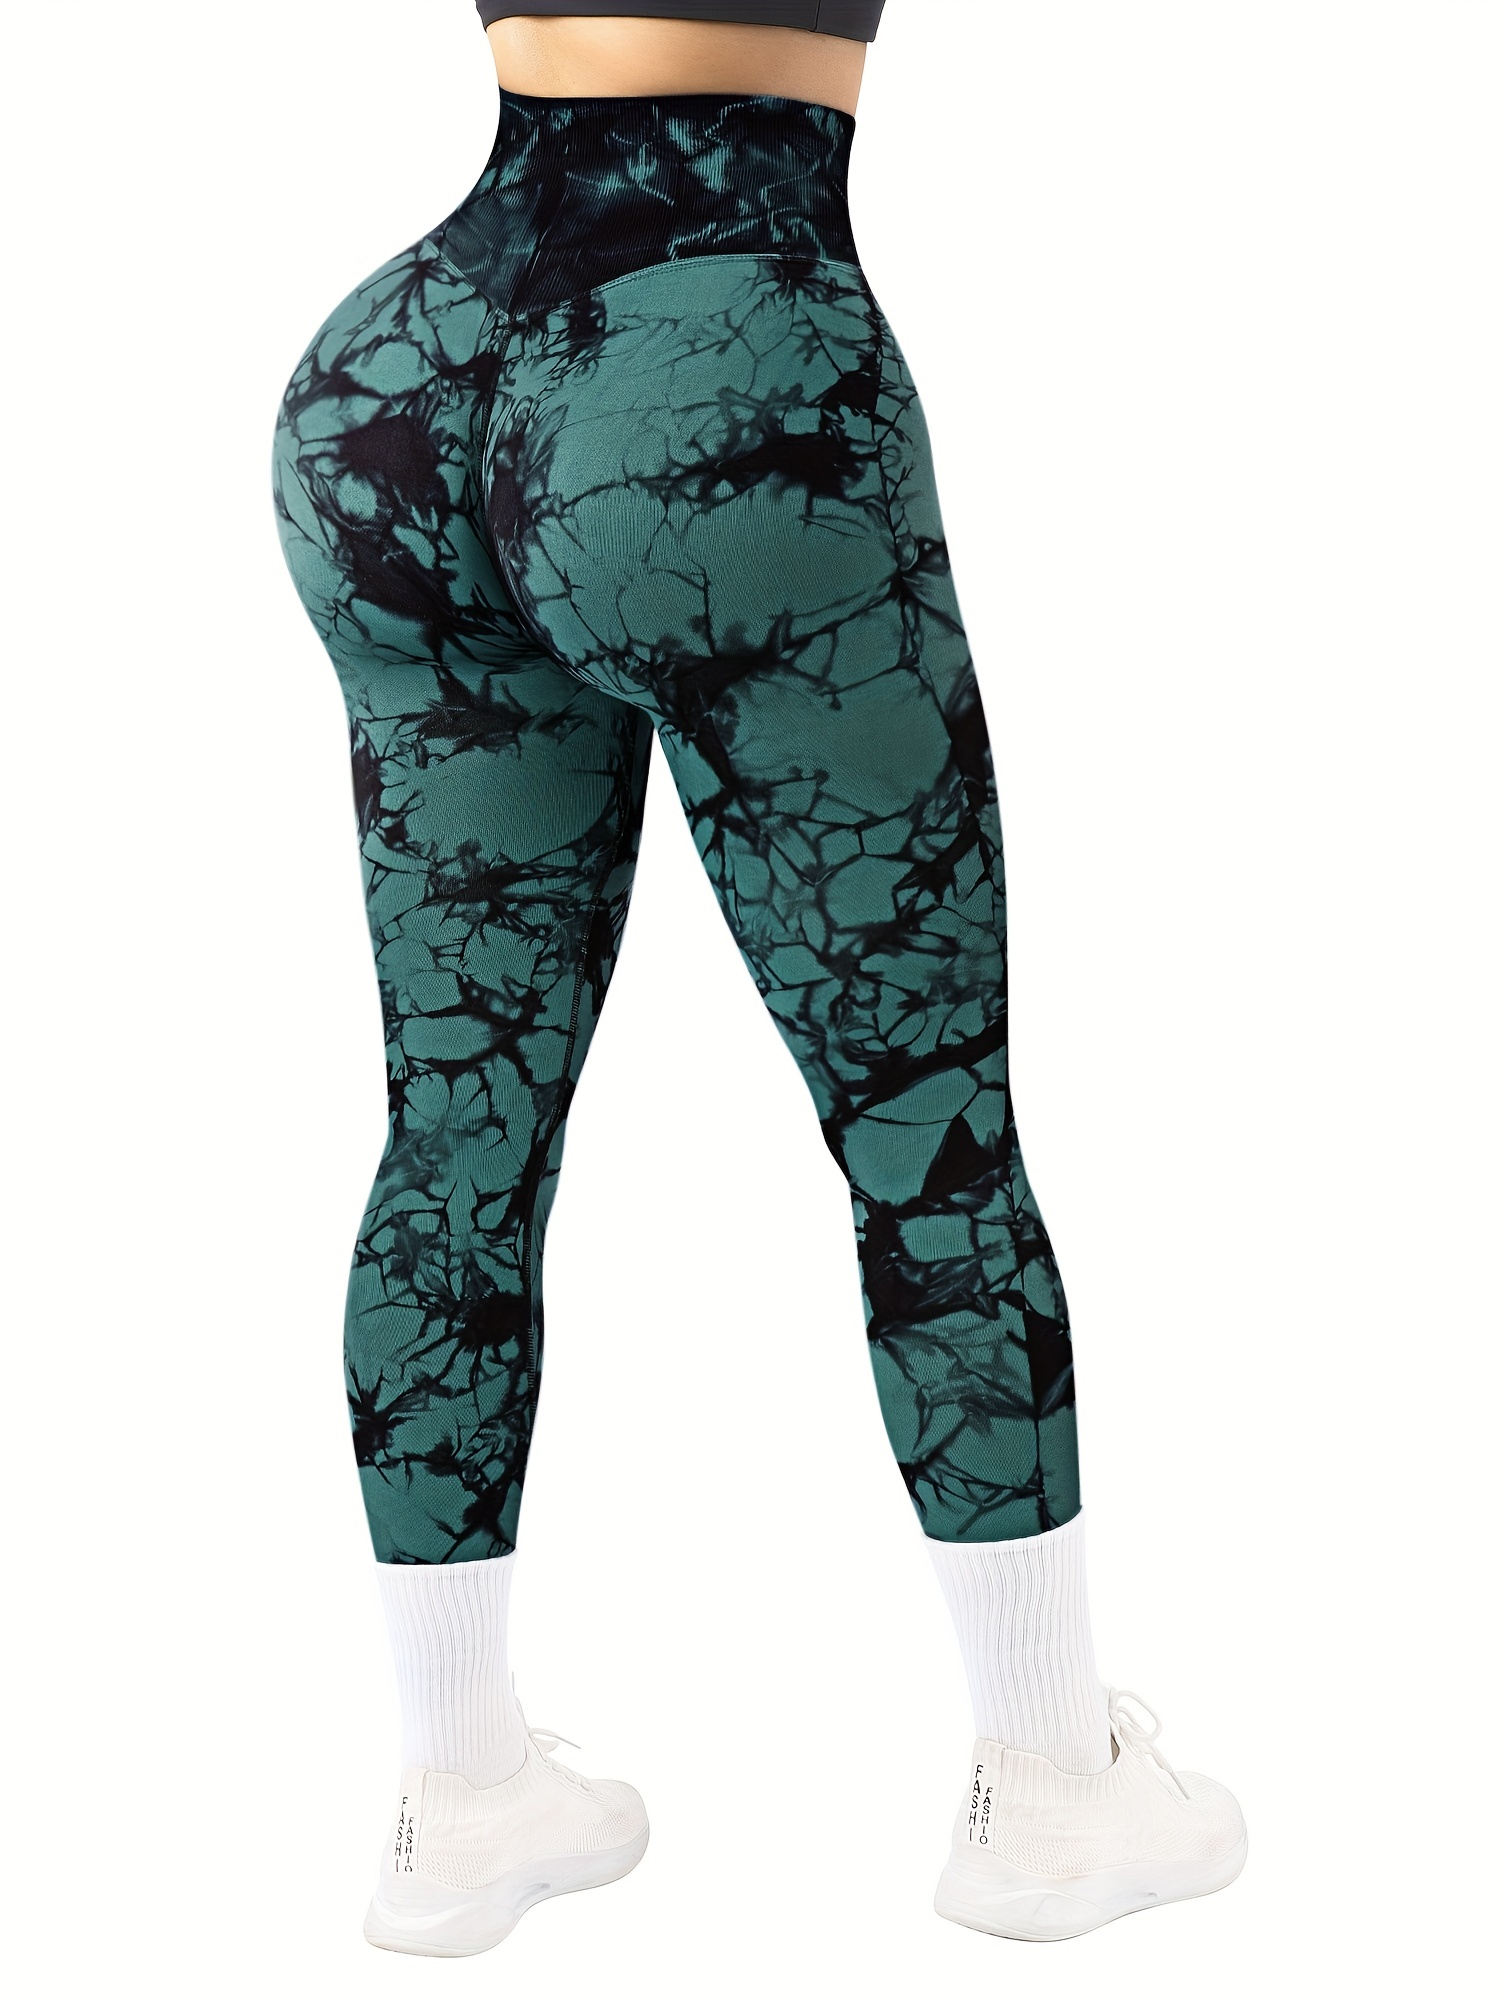 HHmei Camo Yoga Pants High Waisted Seamless Leggings Plus Size Sports  Women's Athletic Active Wear Leggings Skinny Tights S at  Women's  Clothing store